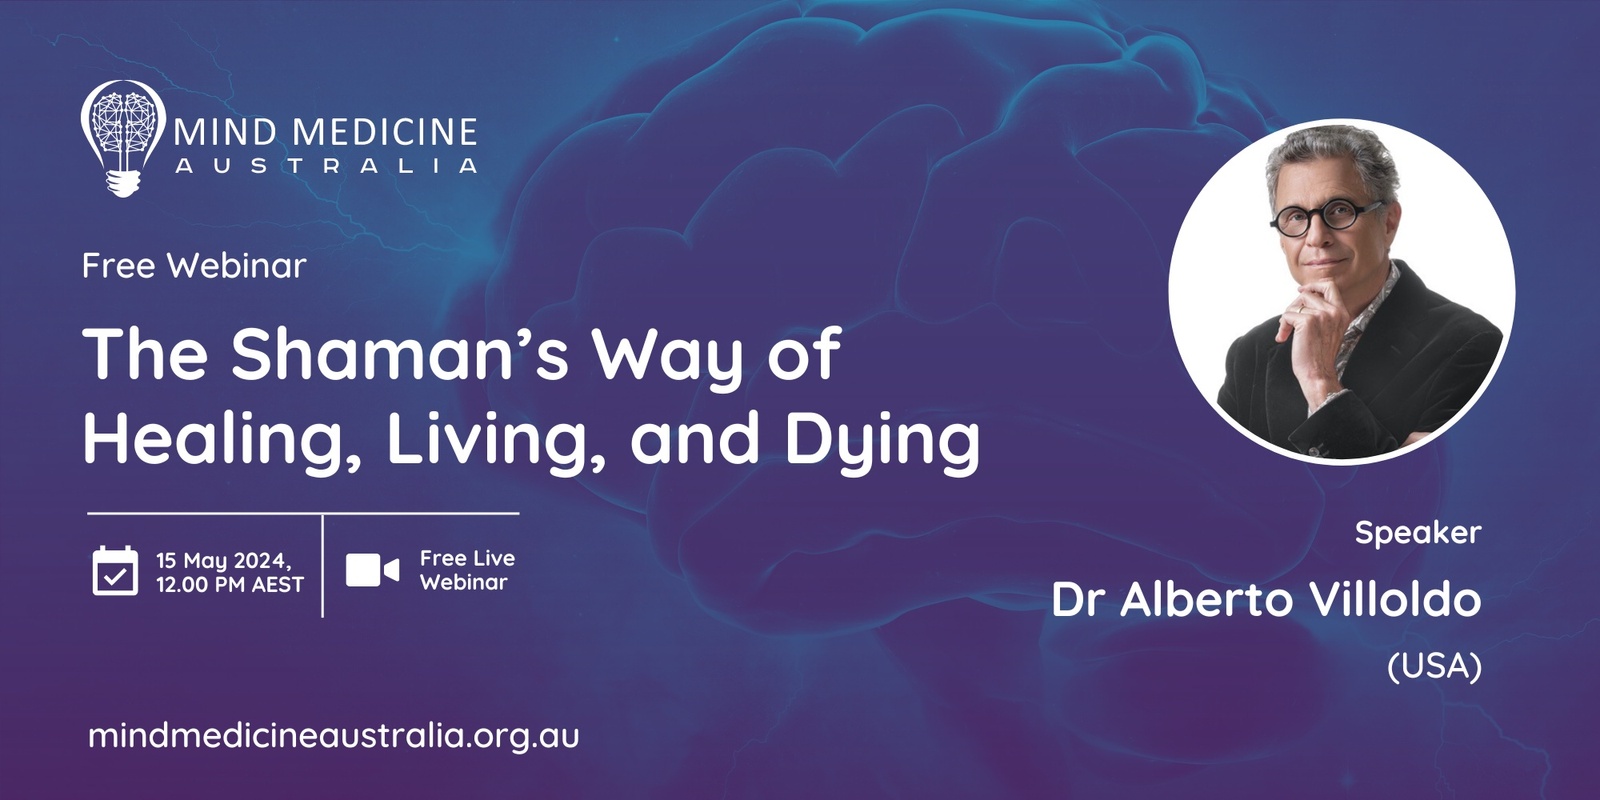 Banner image for Mind Medicine Australia FREE Webinar - The Shaman’s Way of Healing, Living, and Dying with Dr Alberto Villoldo (USA)